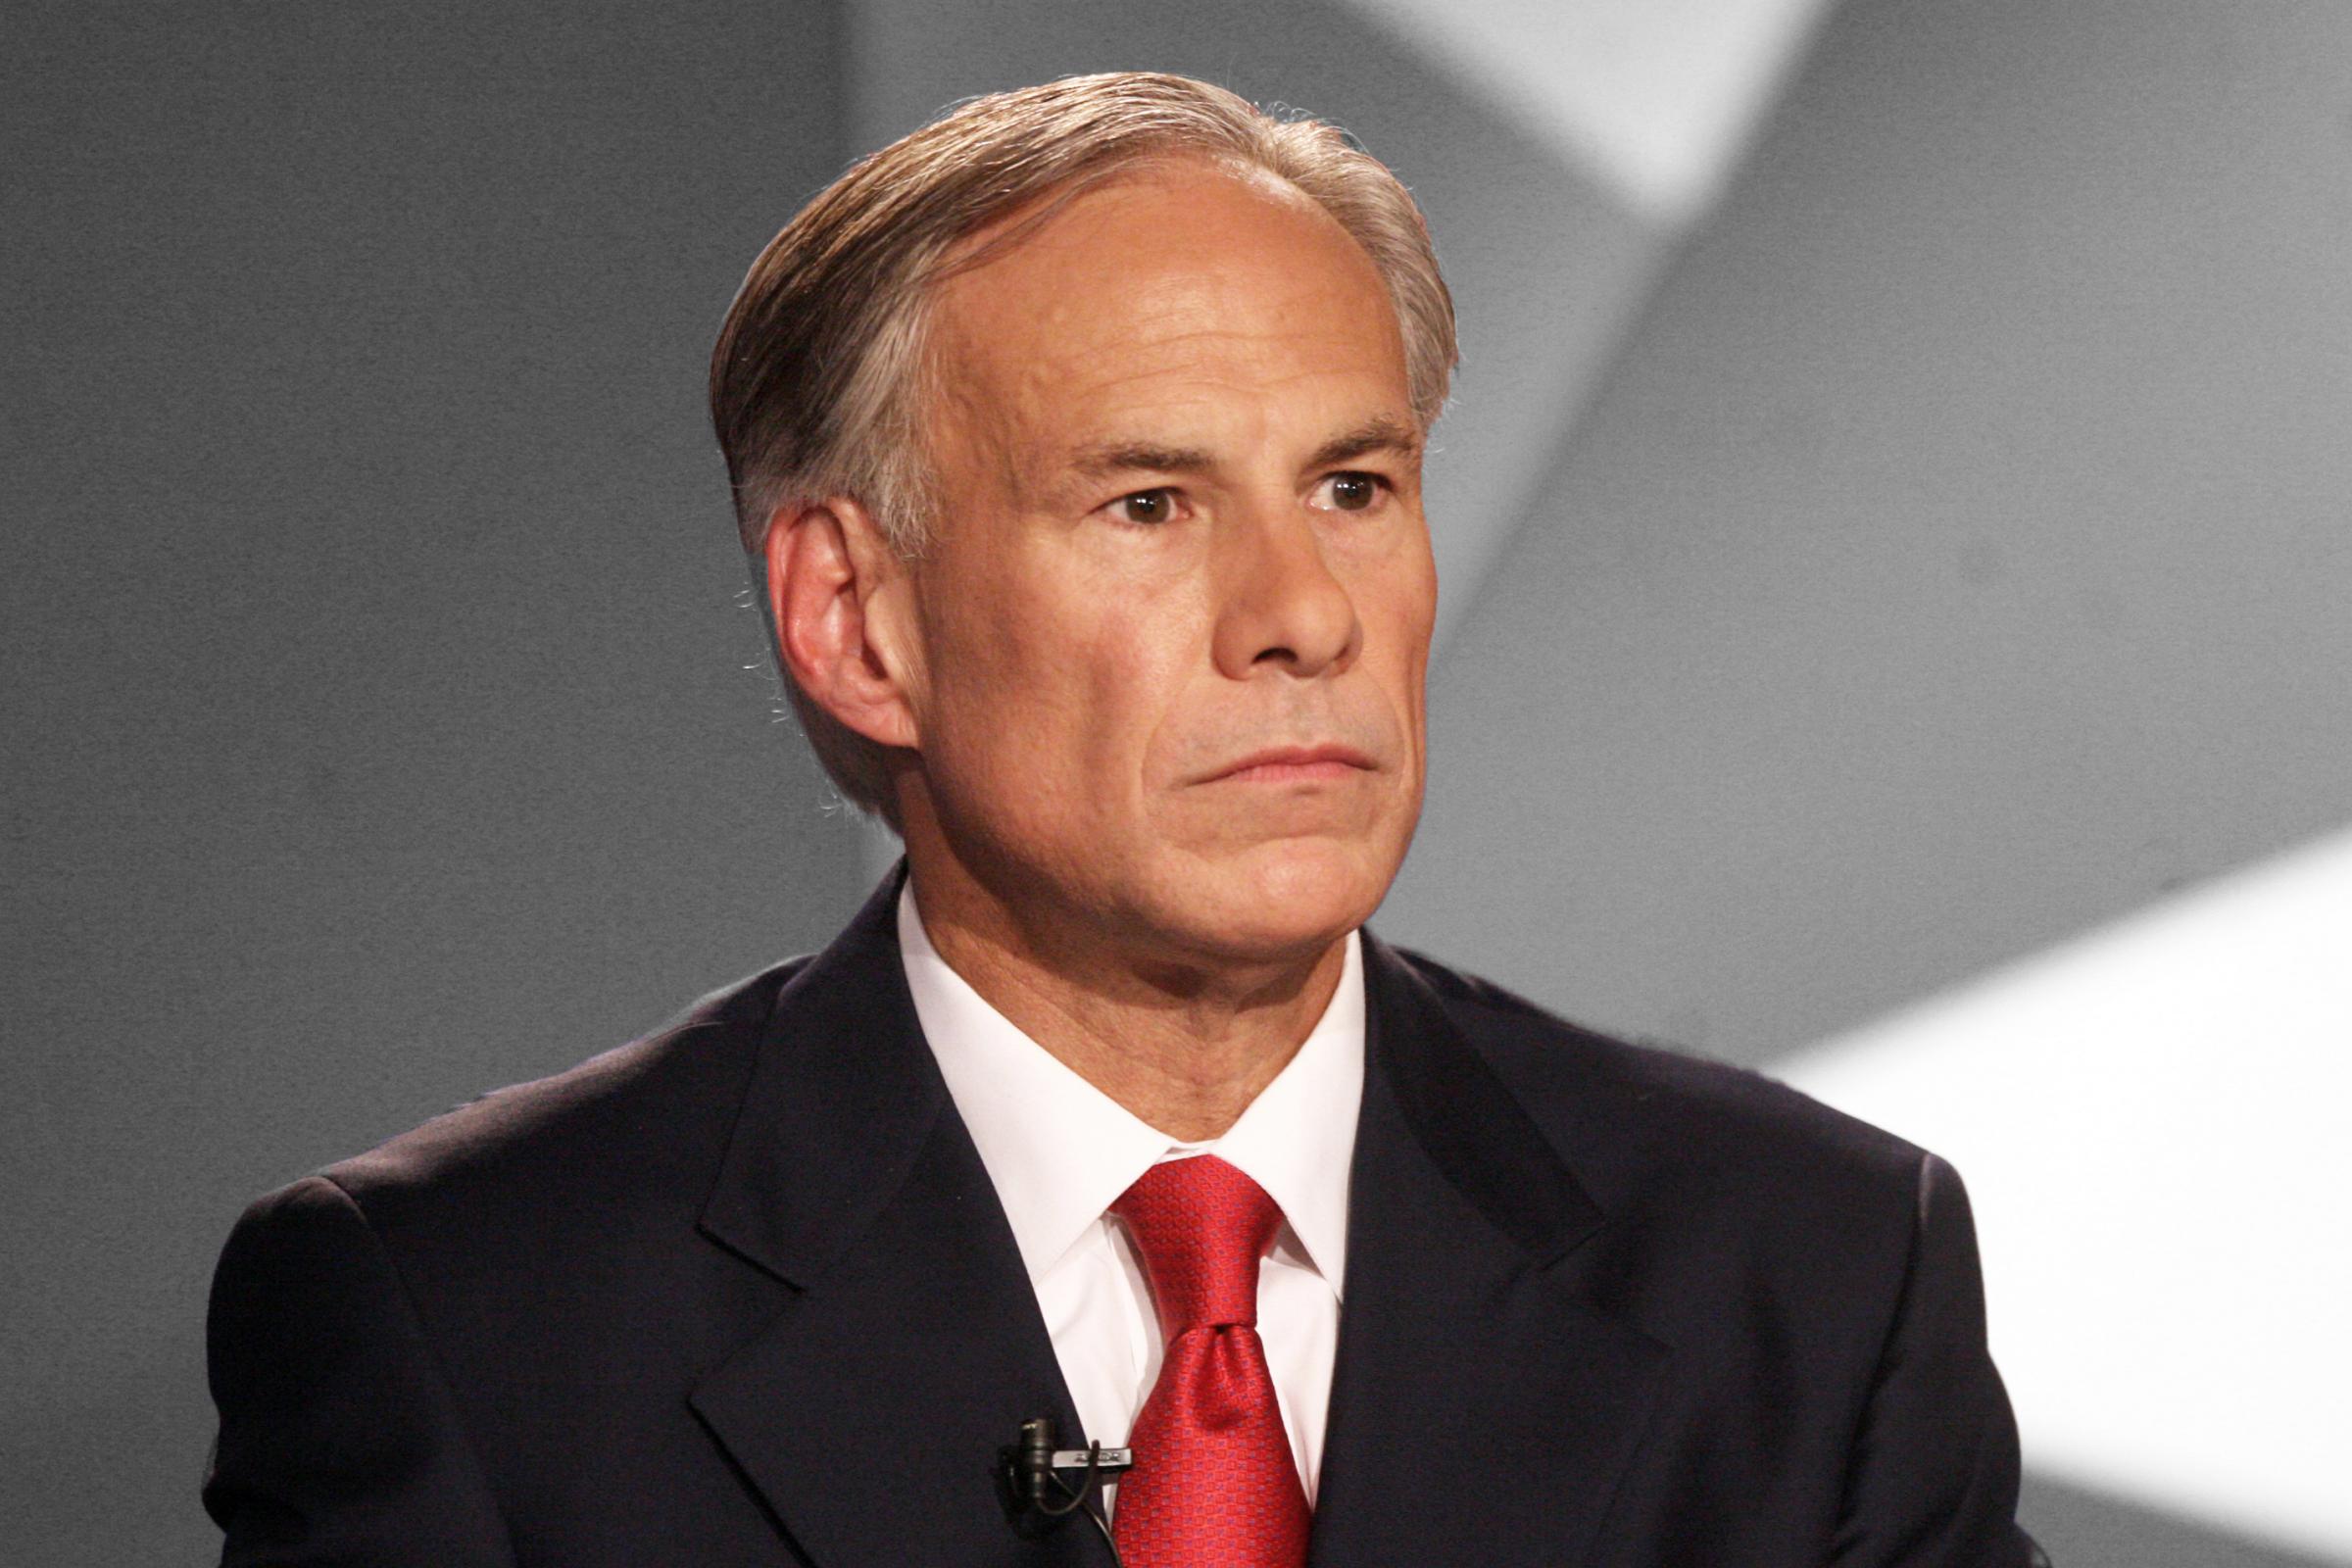 Greg Abbott As head of the biggest, reddest state, the Texas Governor has a bully pulpit and he's using it. He led the way among GOP governors rejecting Syrian refugees in their states and fought President Obama's immigration actions in court.